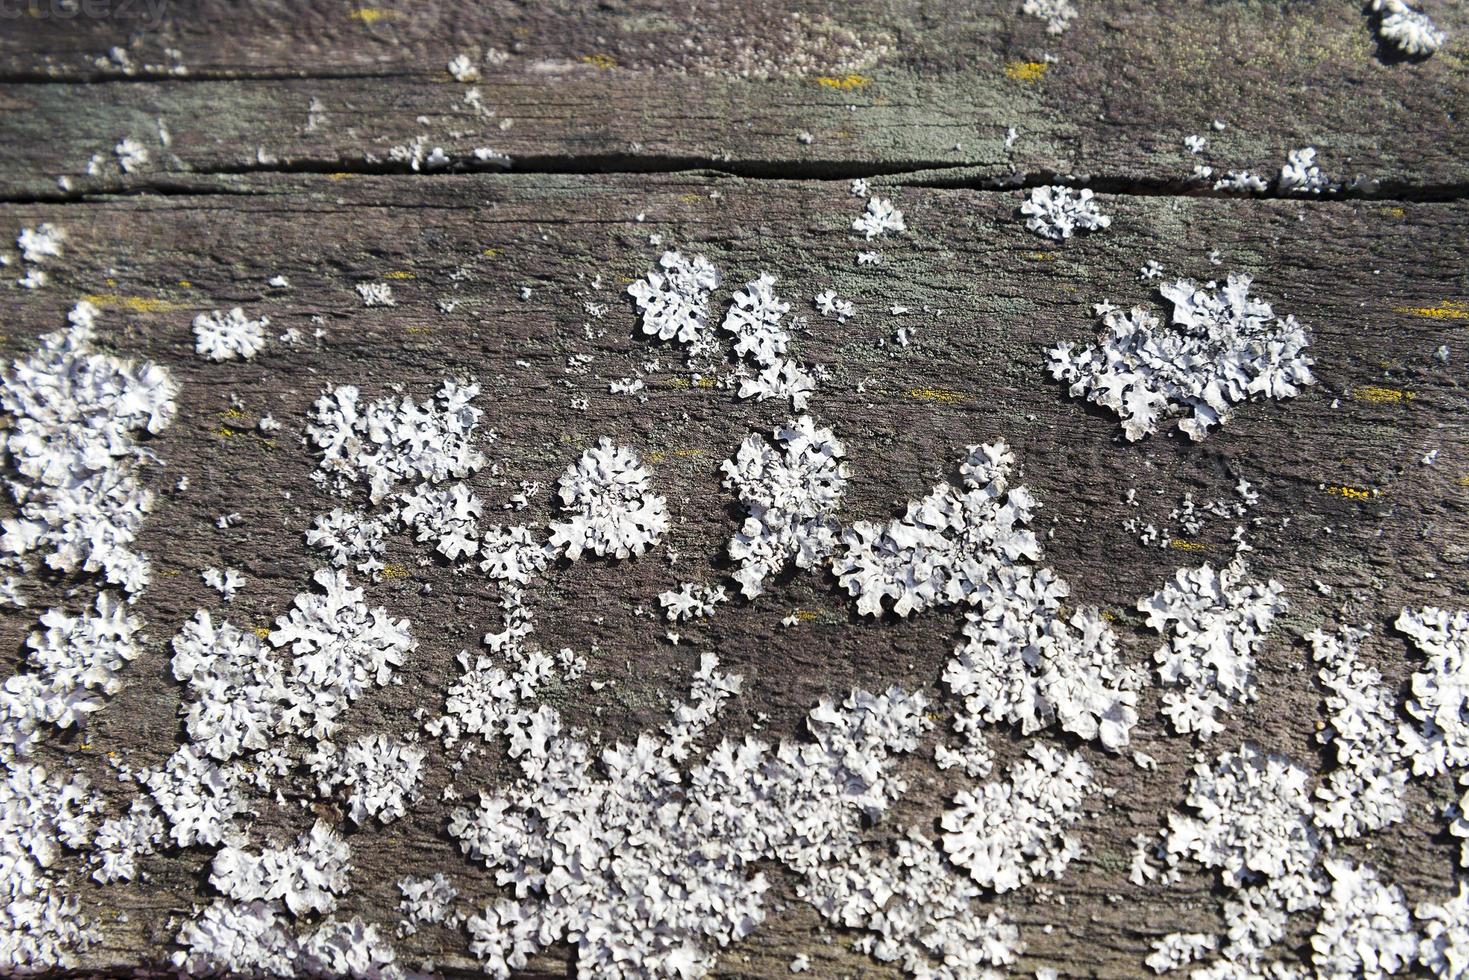 The fungus on the wood surface. photo